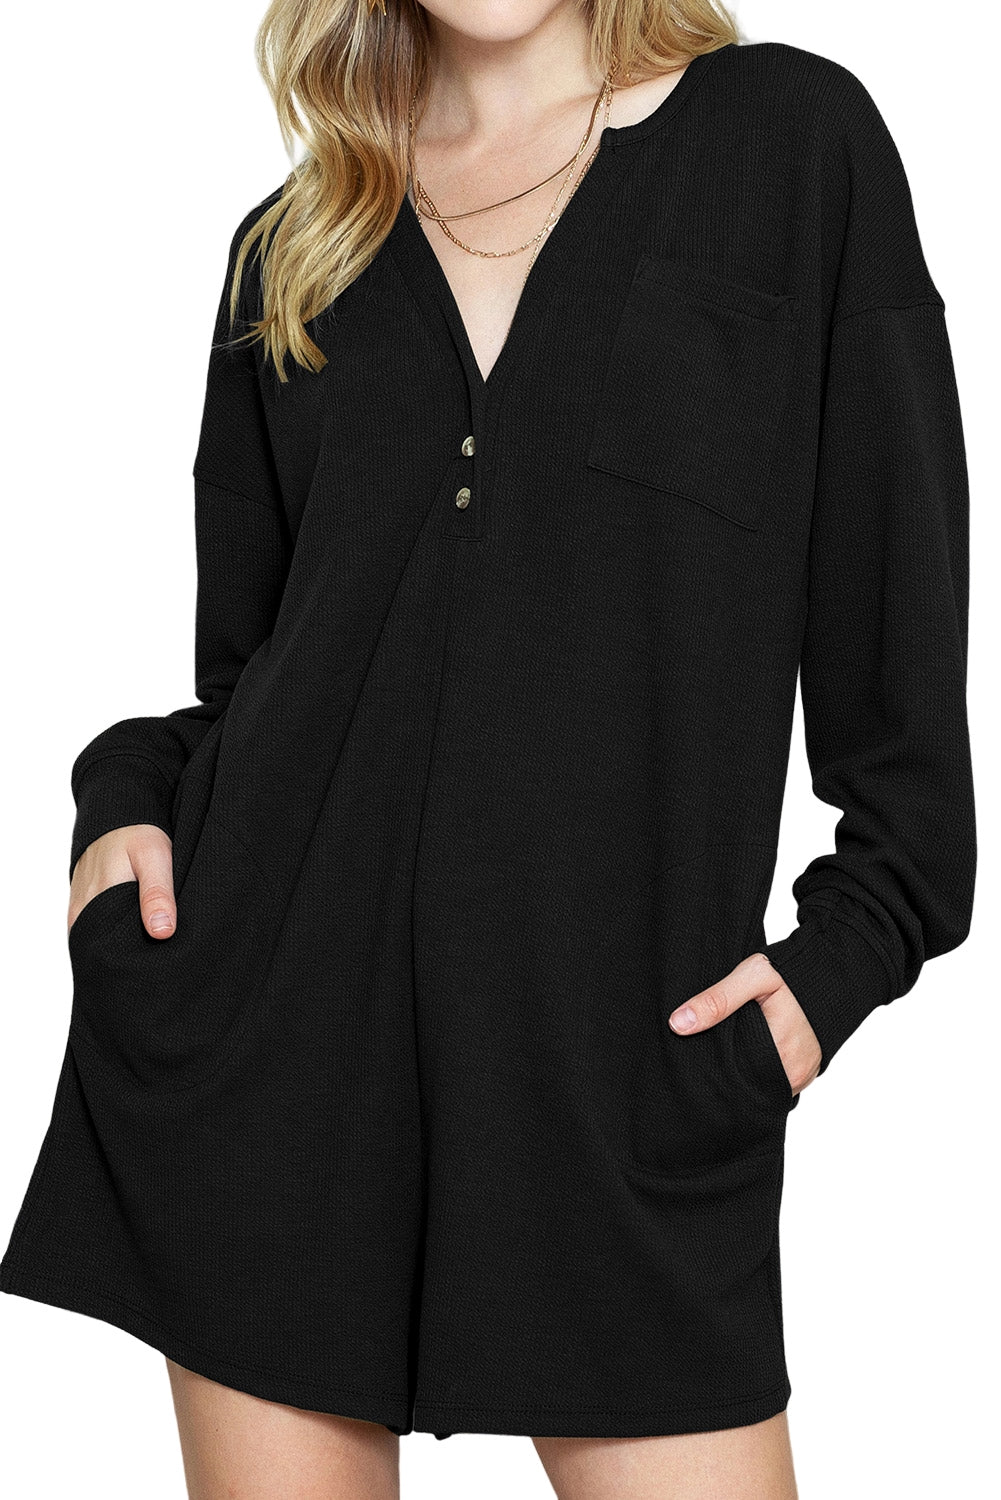 Black Casual Henley Neck Pocketed Romper